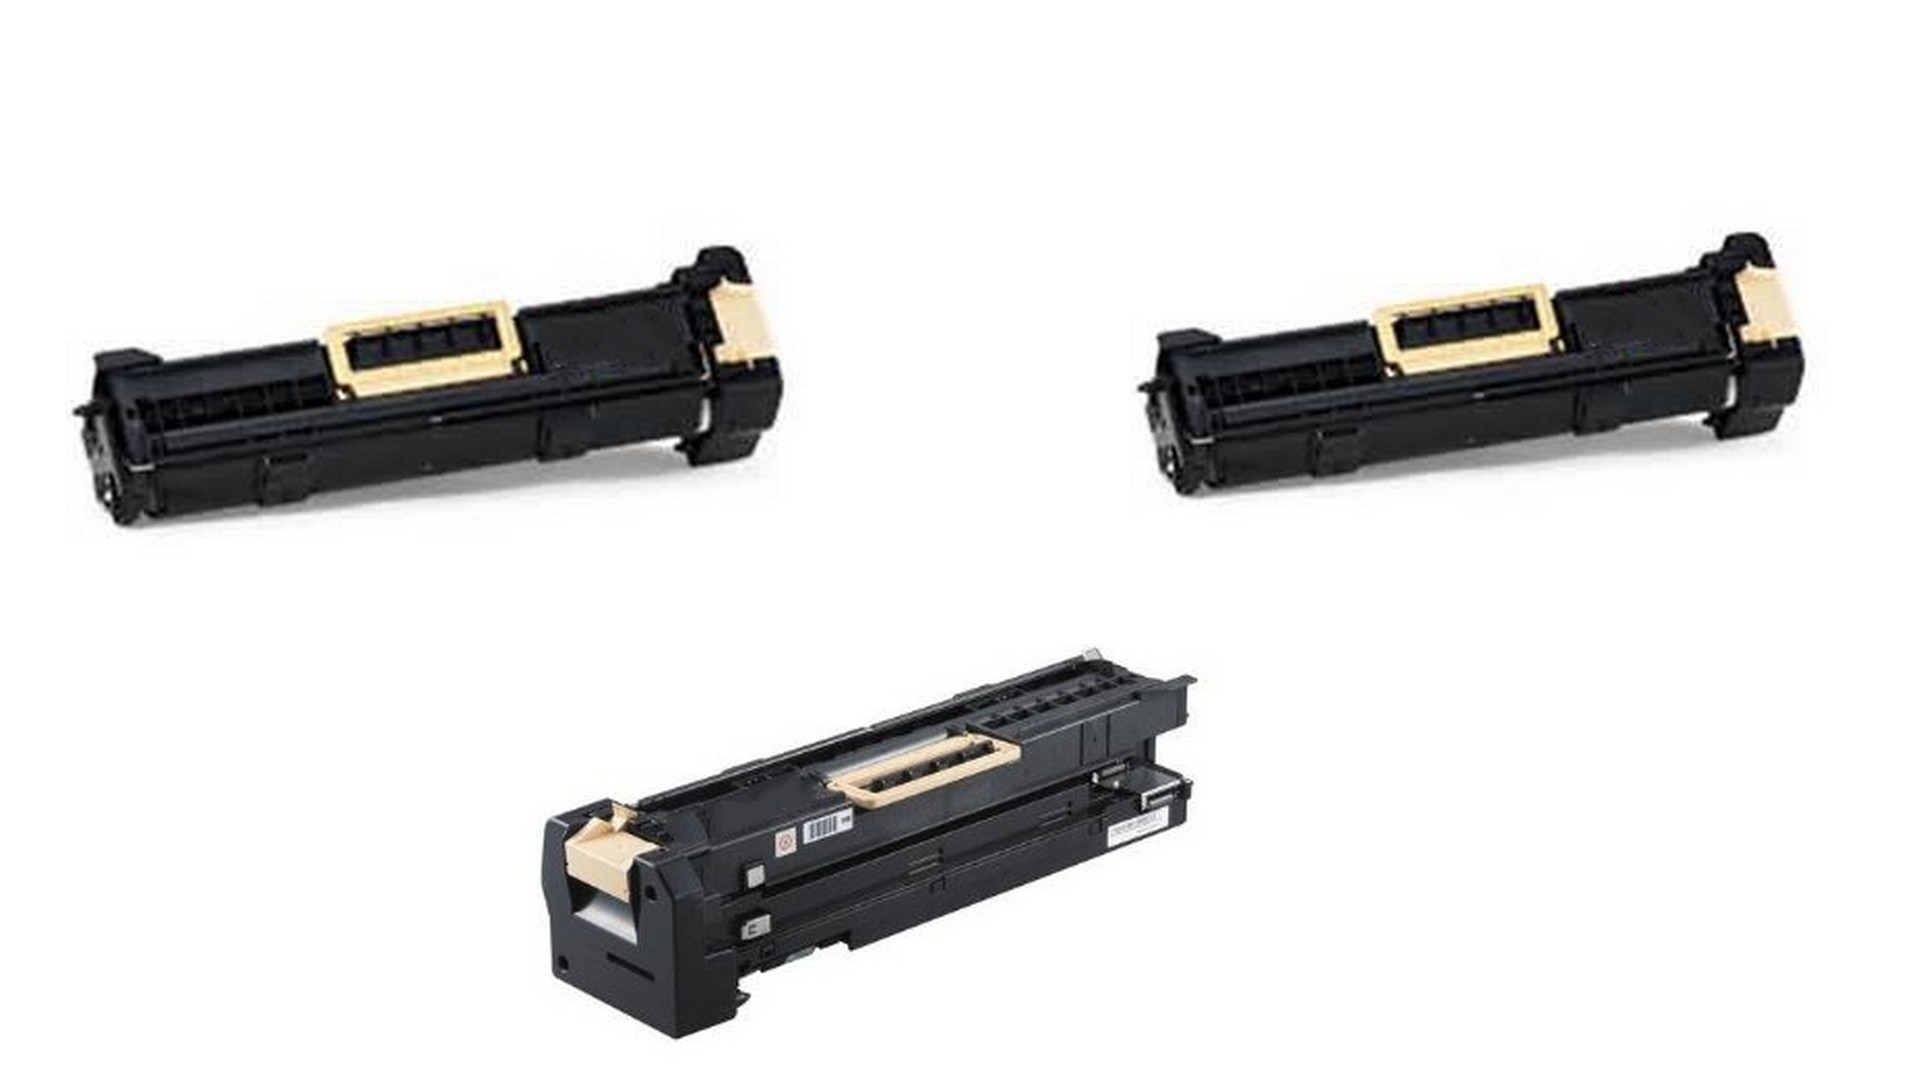 Compatible Xerox Phaser 5550 Toner/Drum Value Combo Pack (2 Toners/1-Drum) (2-106R01294/1-113R00670VP)